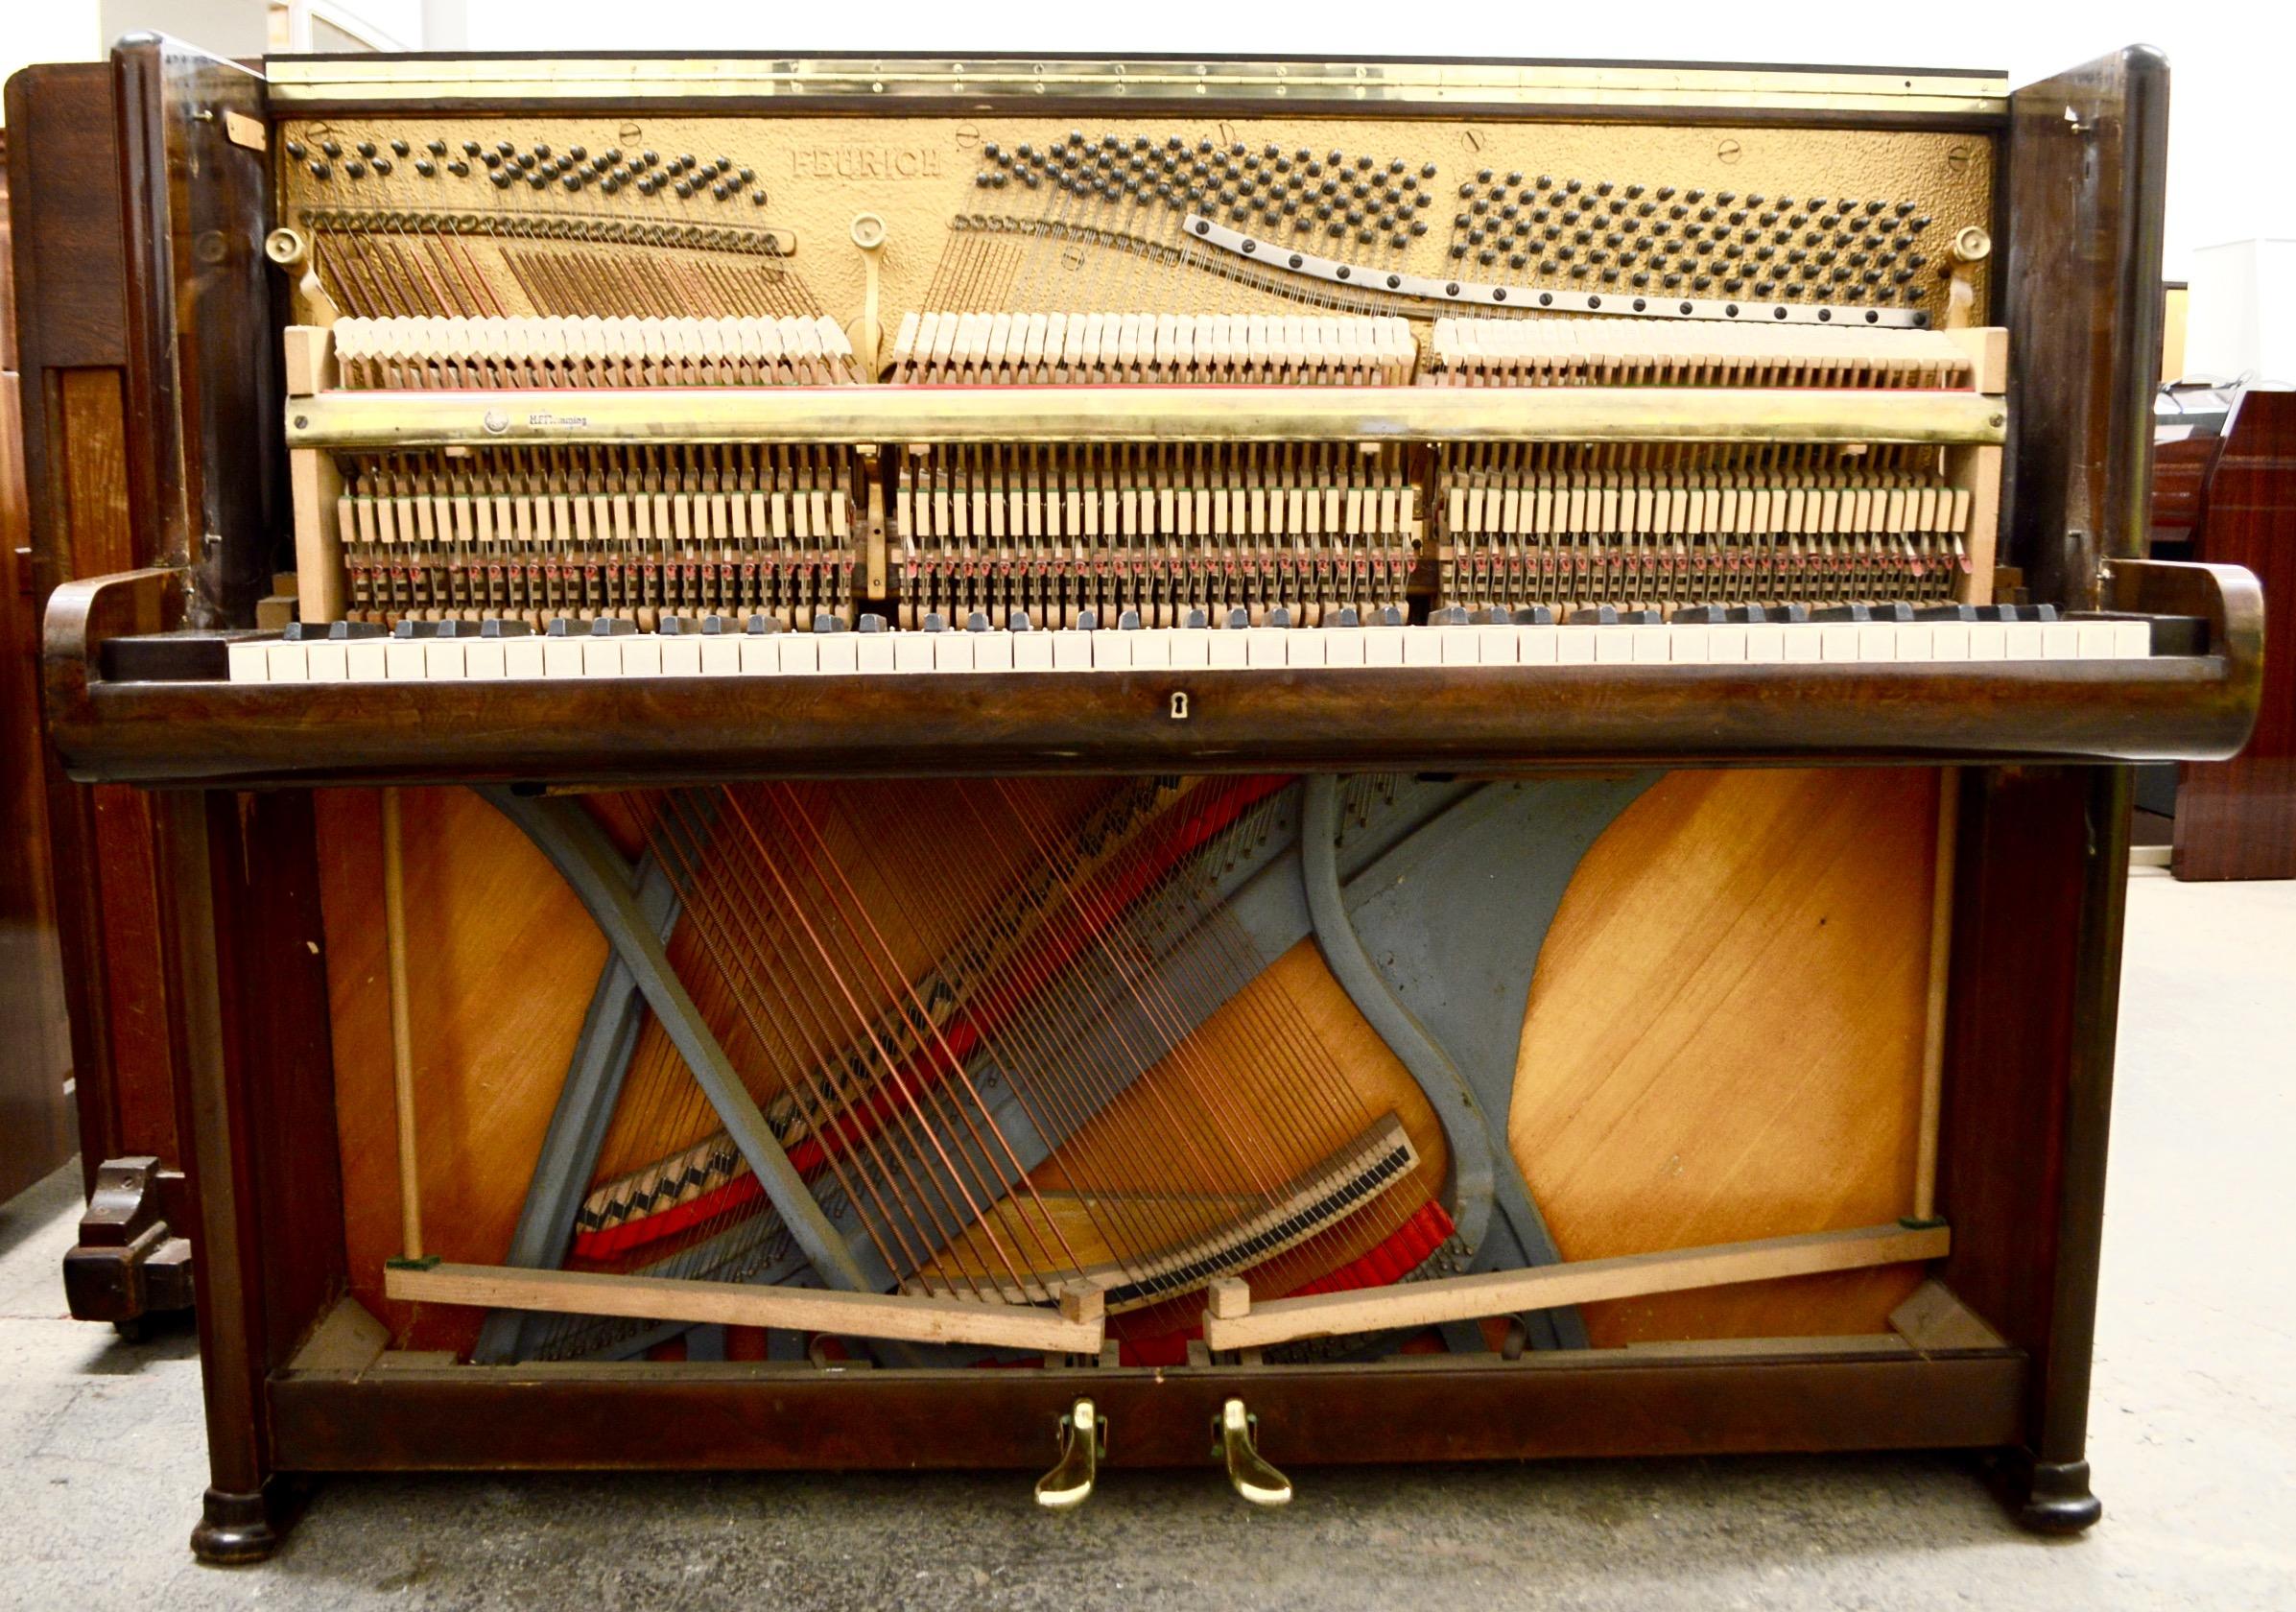 German Made Feurich Piano, Bahaus Designed, Made in 1938 In Good Condition For Sale In Macclesfield, Cheshire